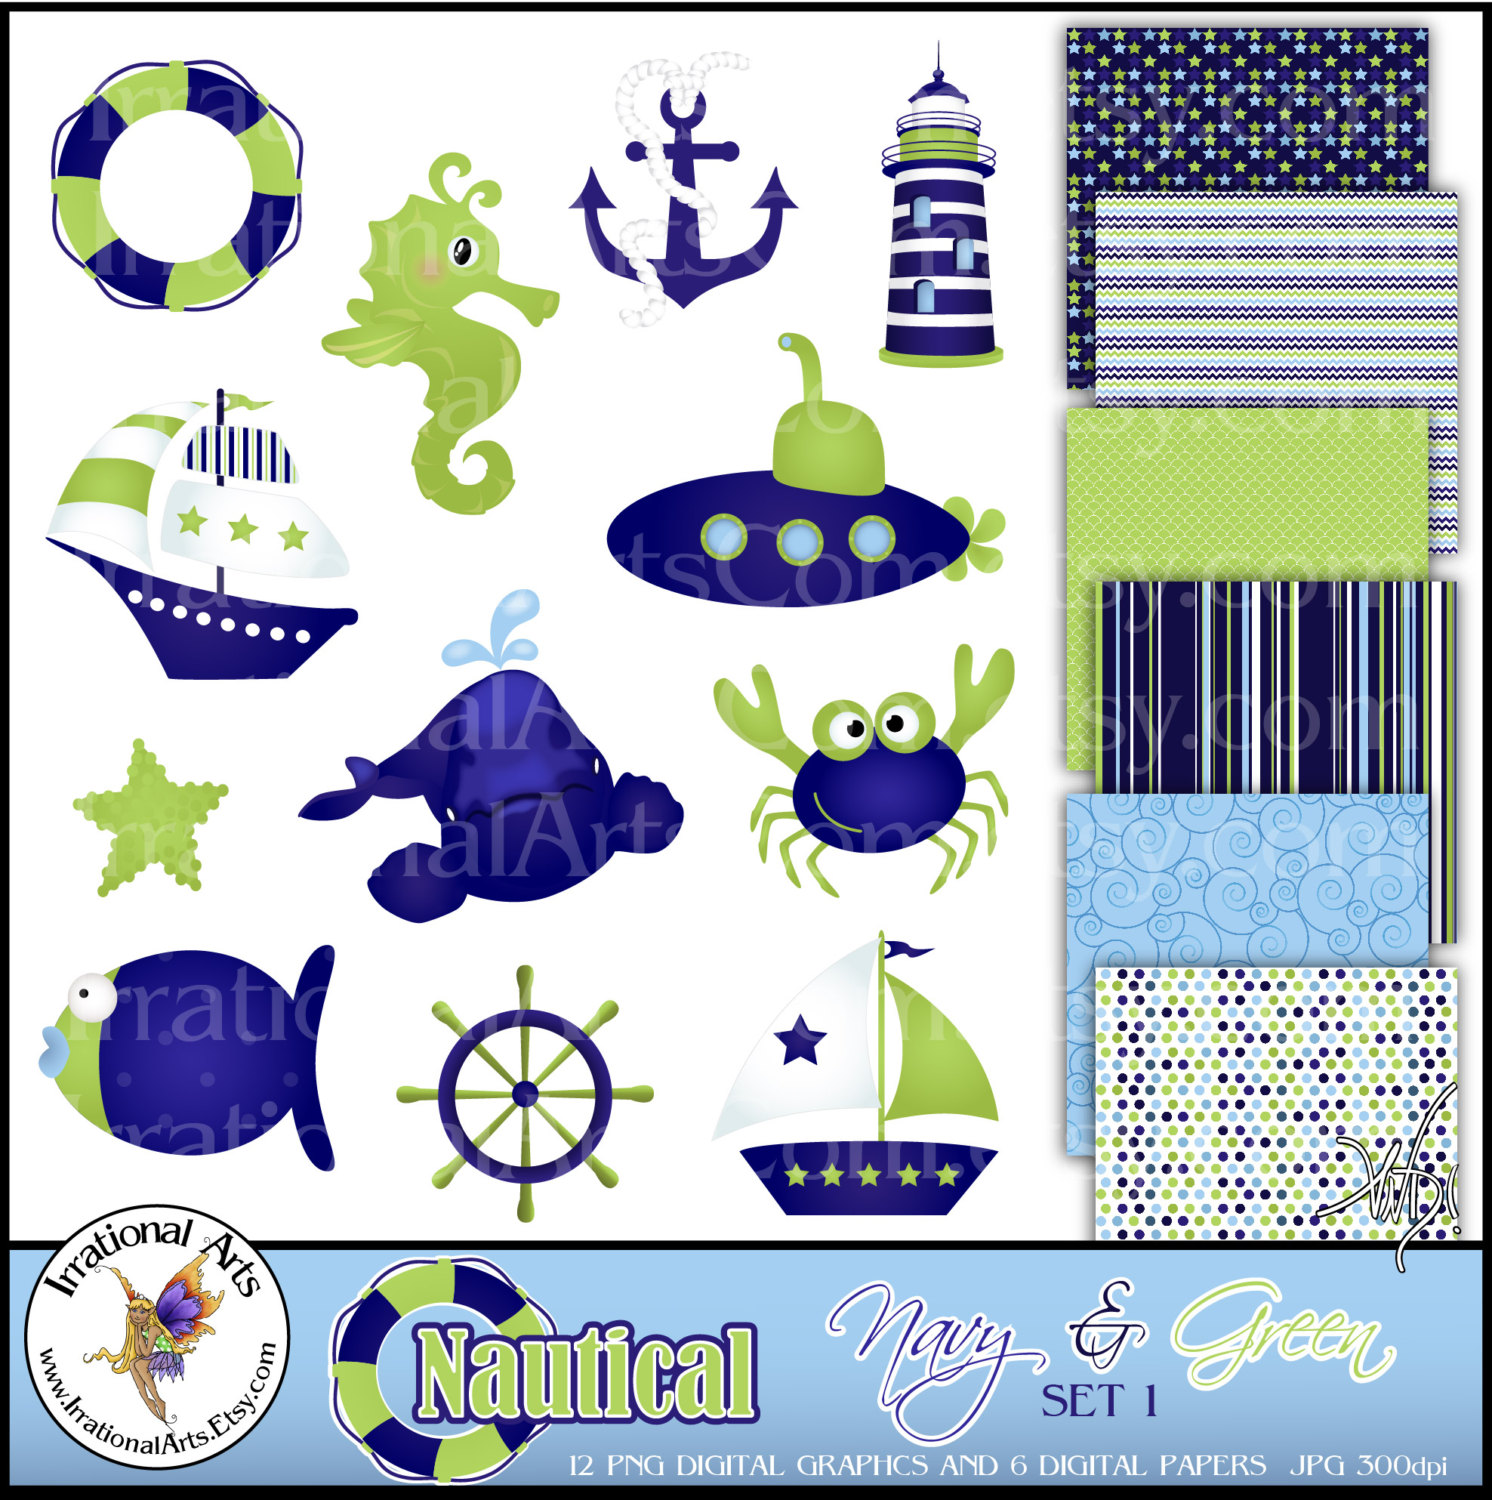 Nautical Navy And Green Set 1 With 12digital Graphics And 6 Digital    